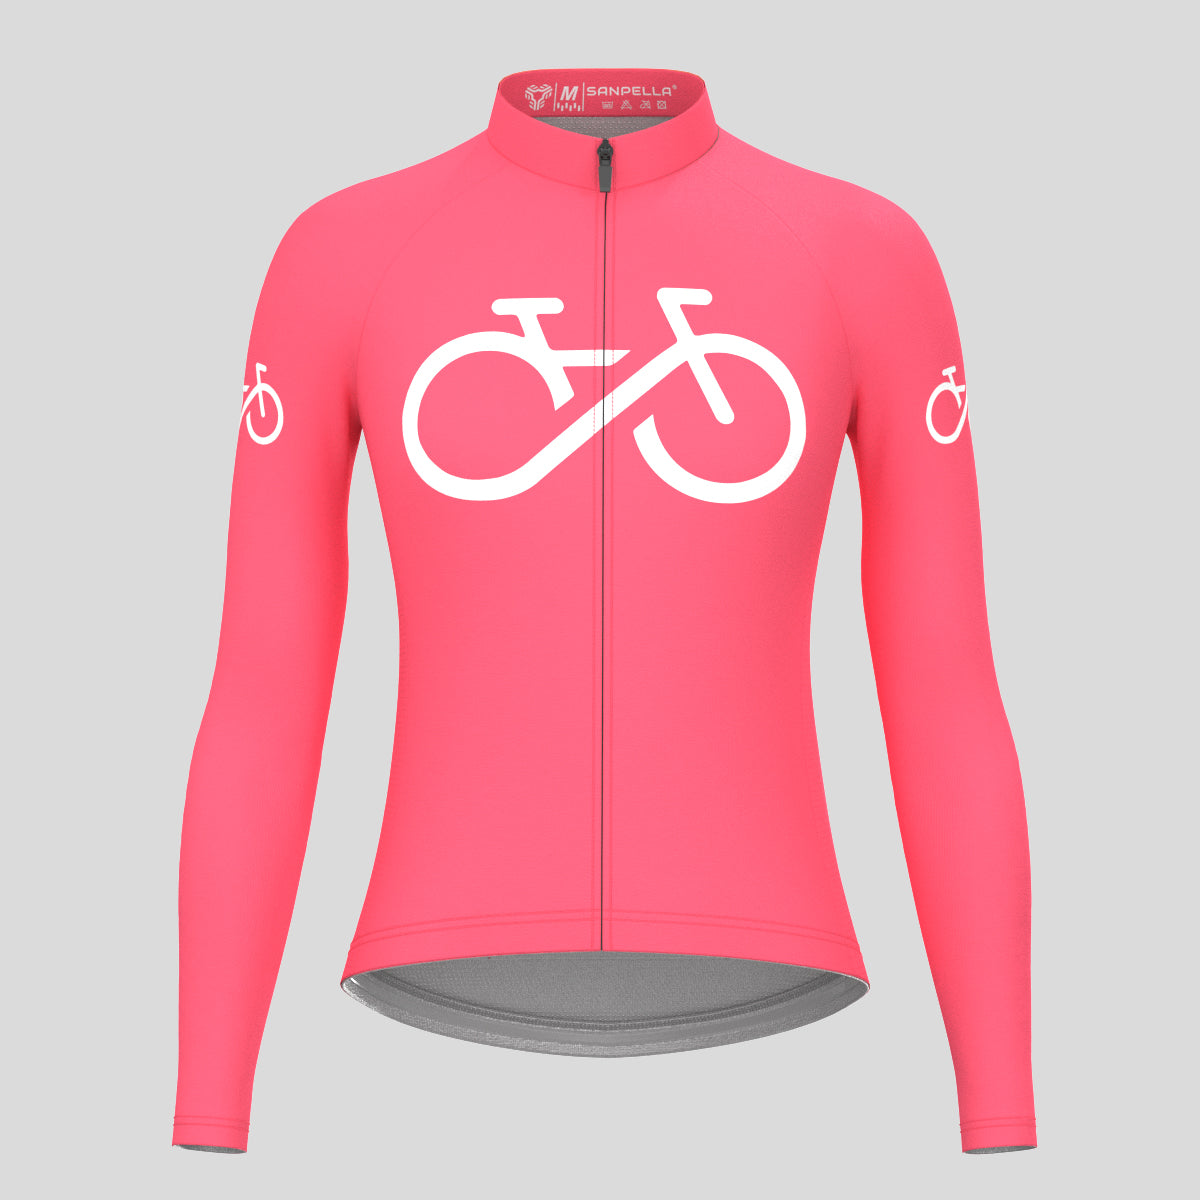 Bike Forever Women's LS Cycling Jersey - Pink